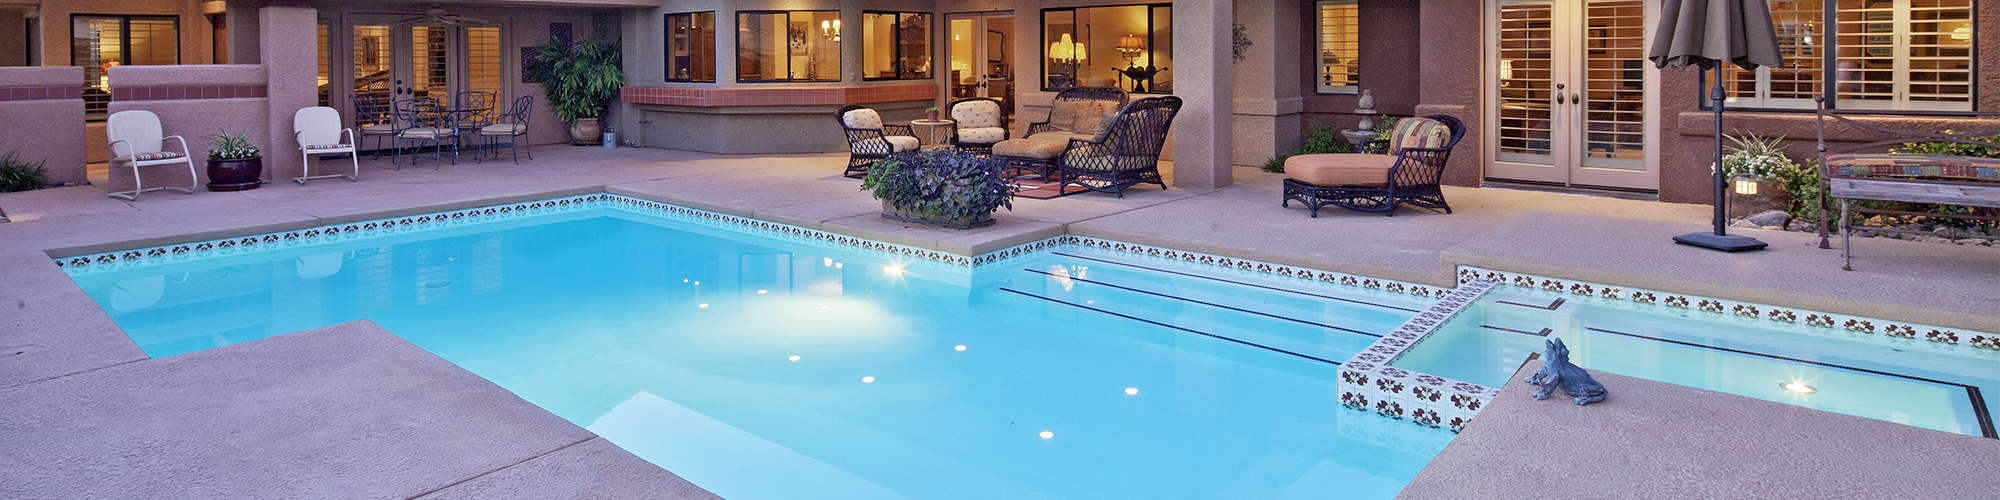 Pool maintenance services in Hudson, FL, that you can count on